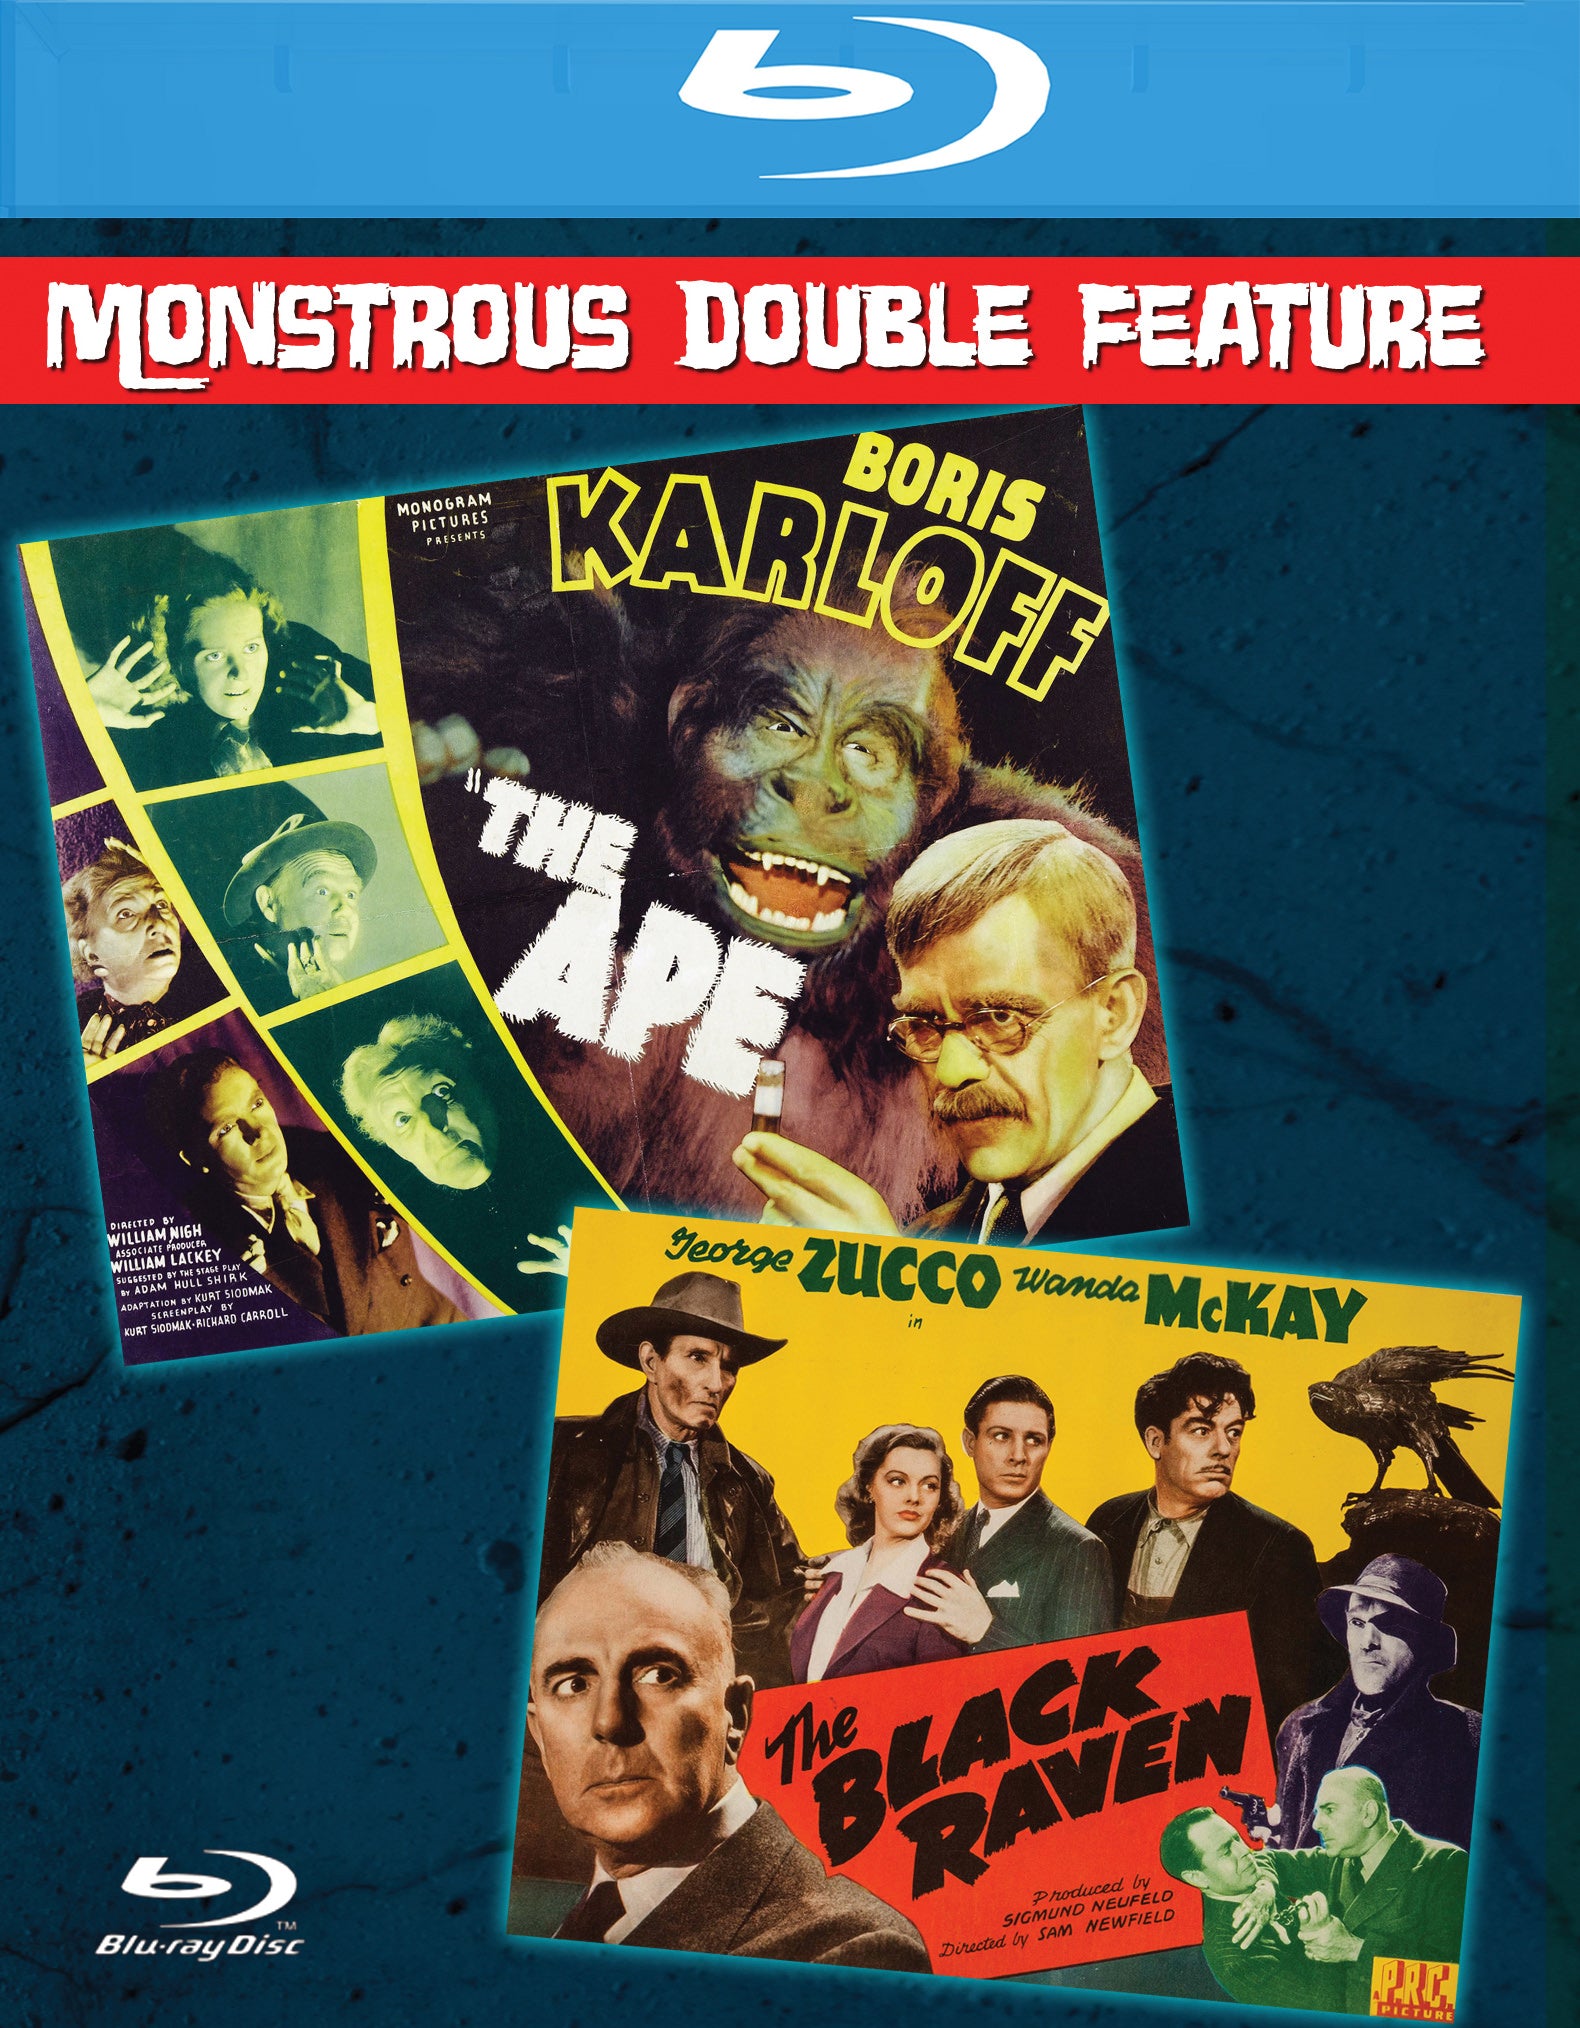 The Ape Man & Doomed to Die (Double Feature) – Makeflix